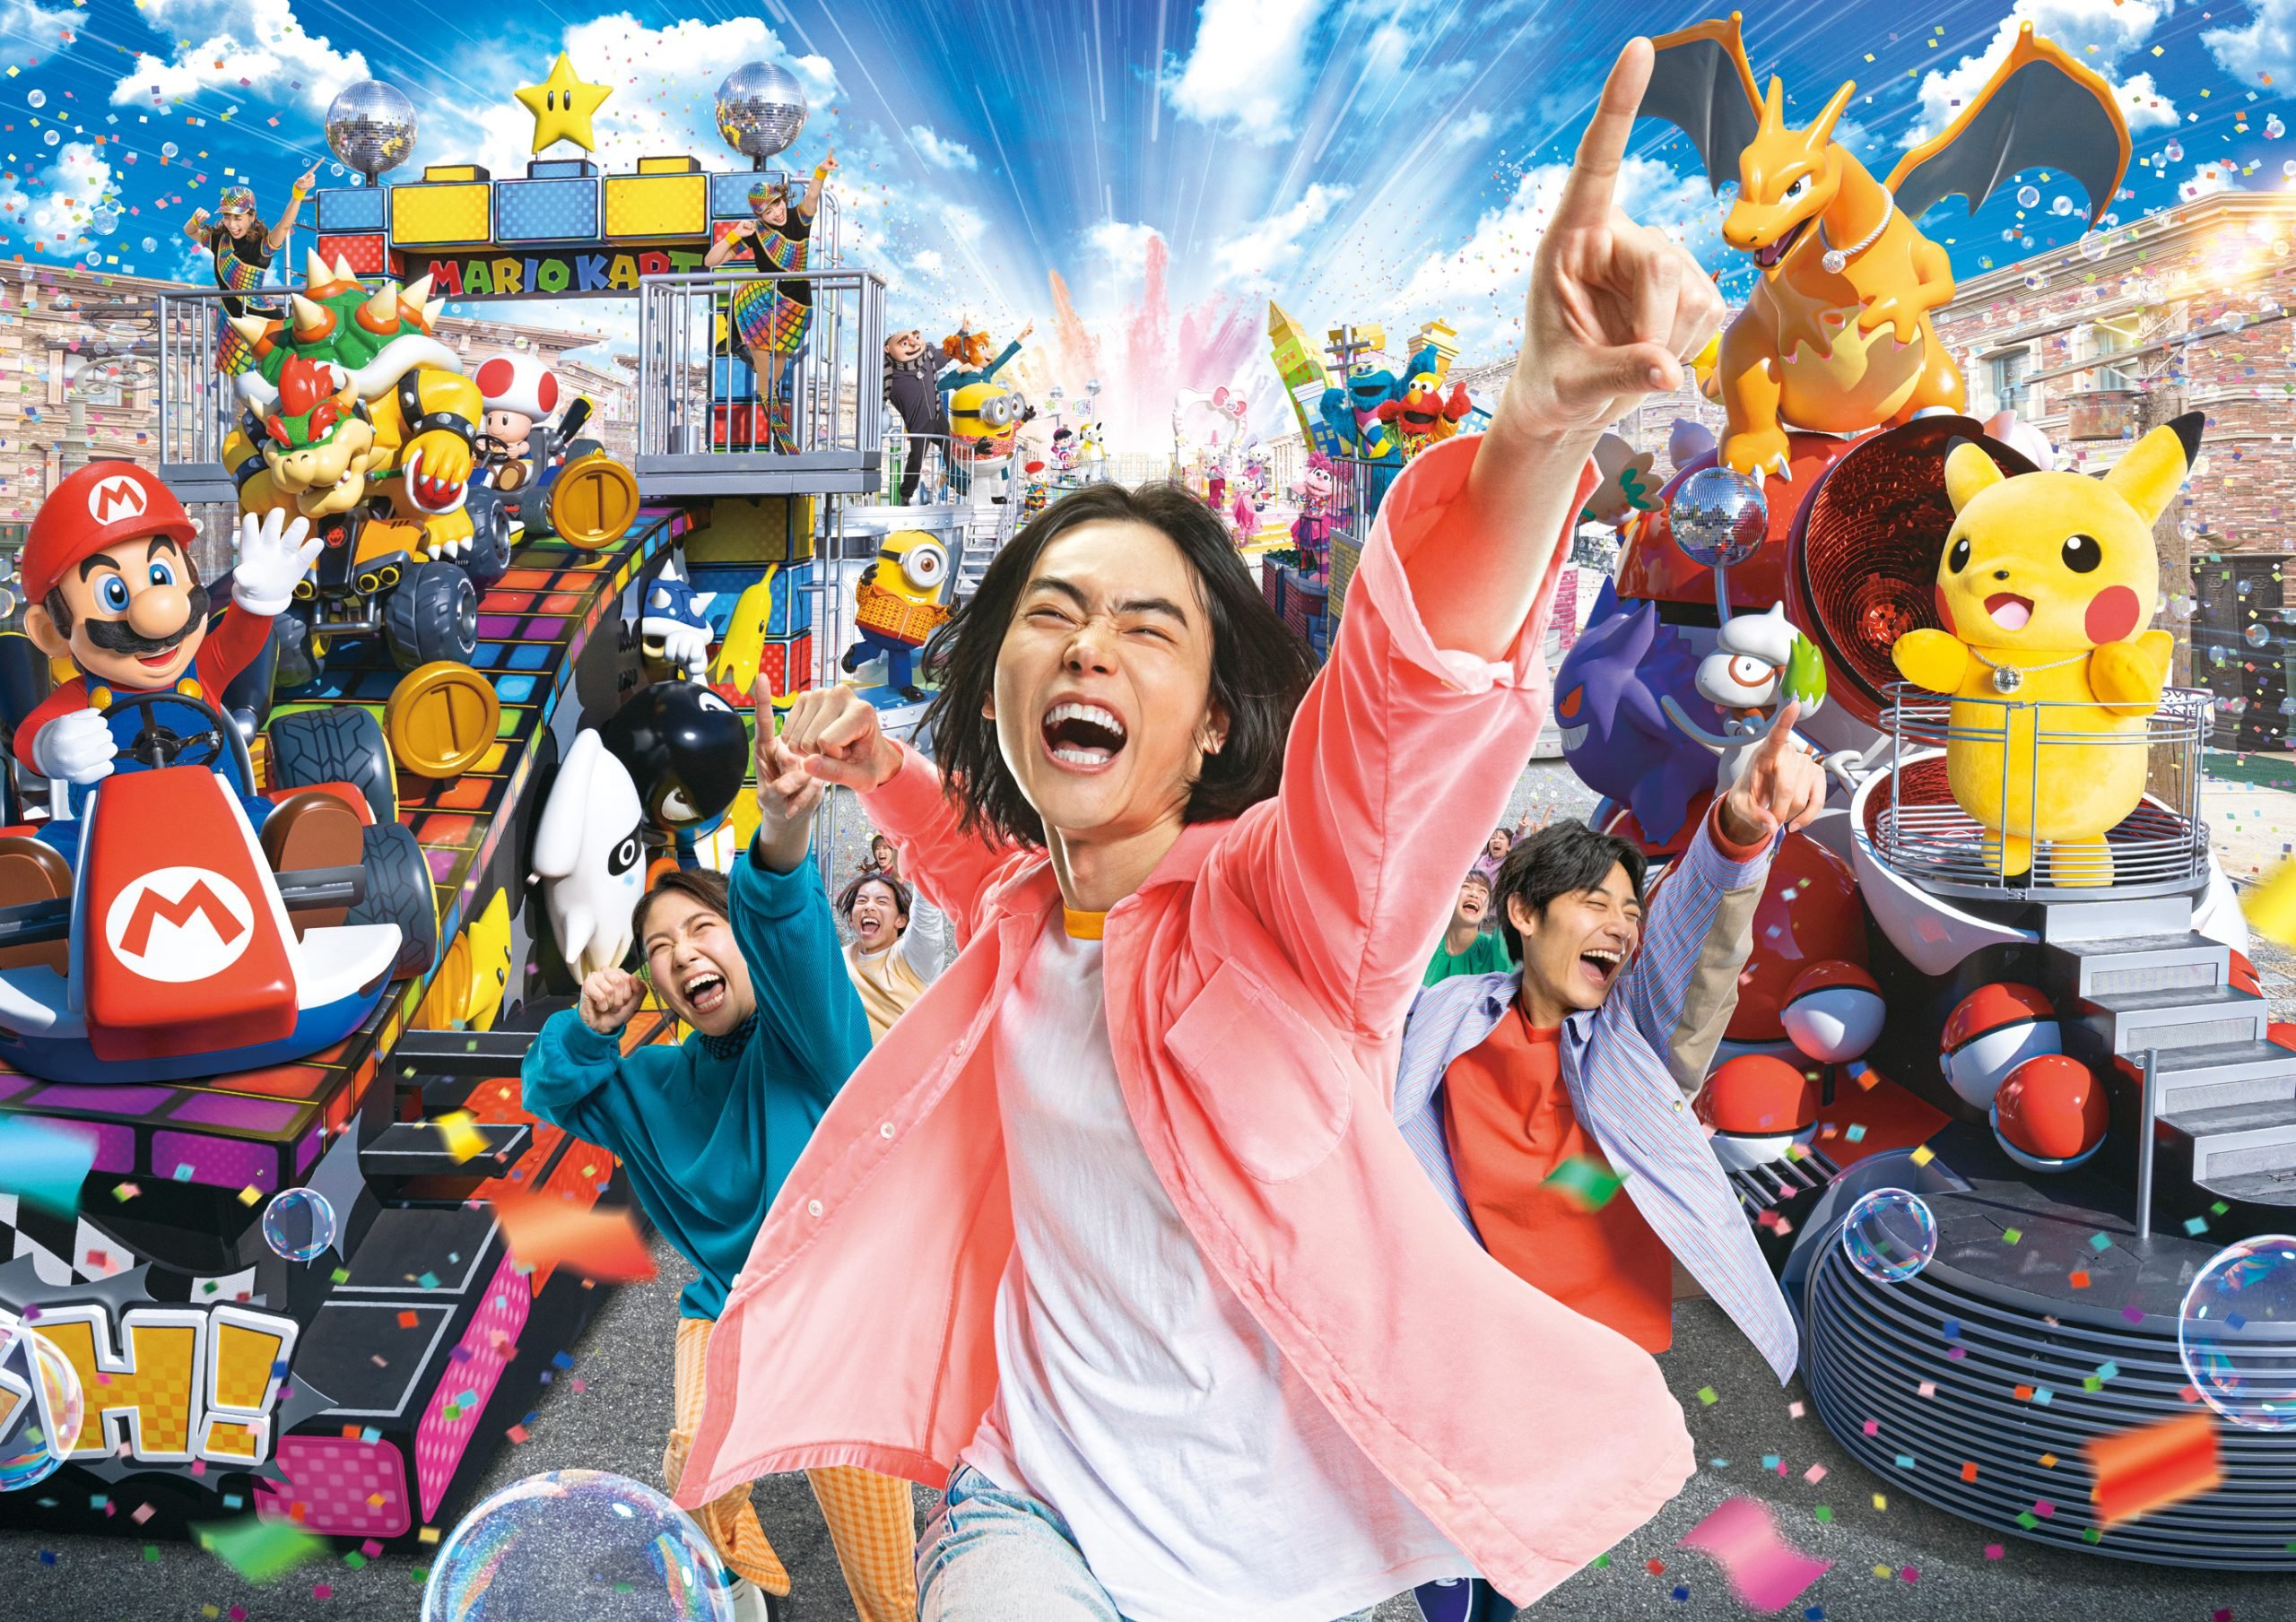 Universal Studios Japan's NO LIMIT! Parade begins in March 2023